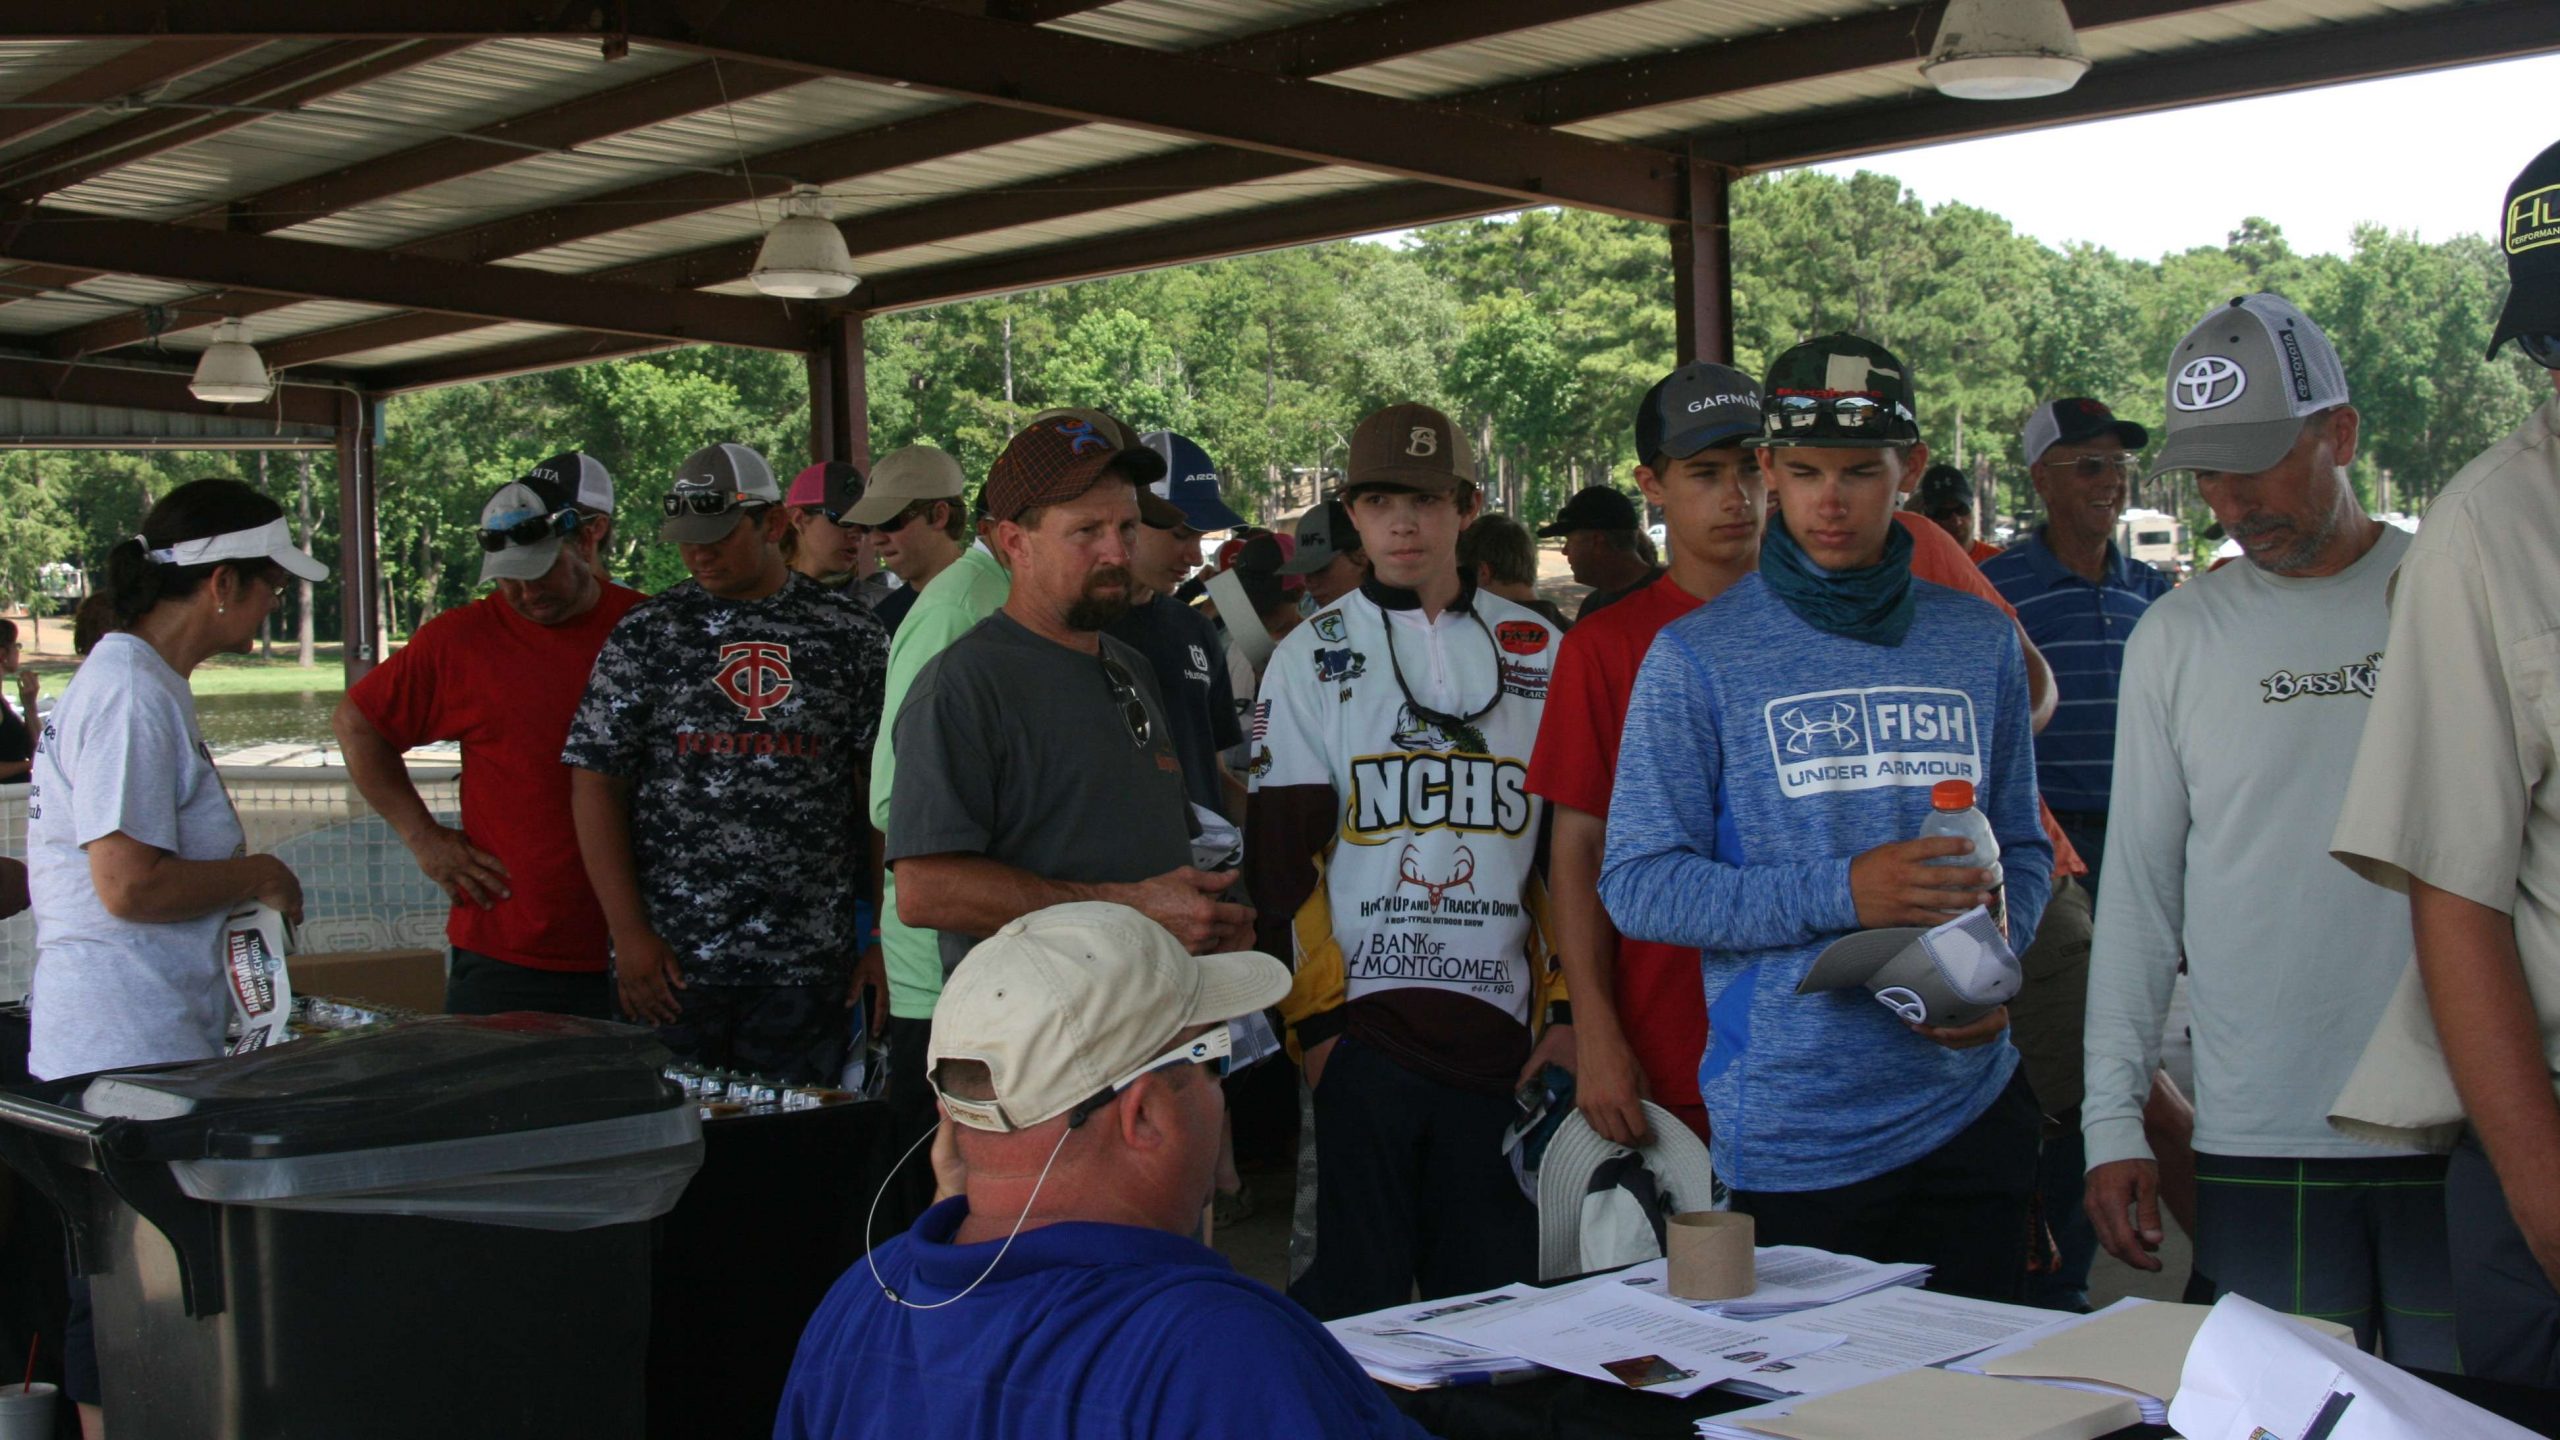 A crowd began to form right before the 4 p.m. deadline to register for the Costa Bassmaster High School Open. The deadline had to be extended as inclement weather moved into the area Sunday afternoon.